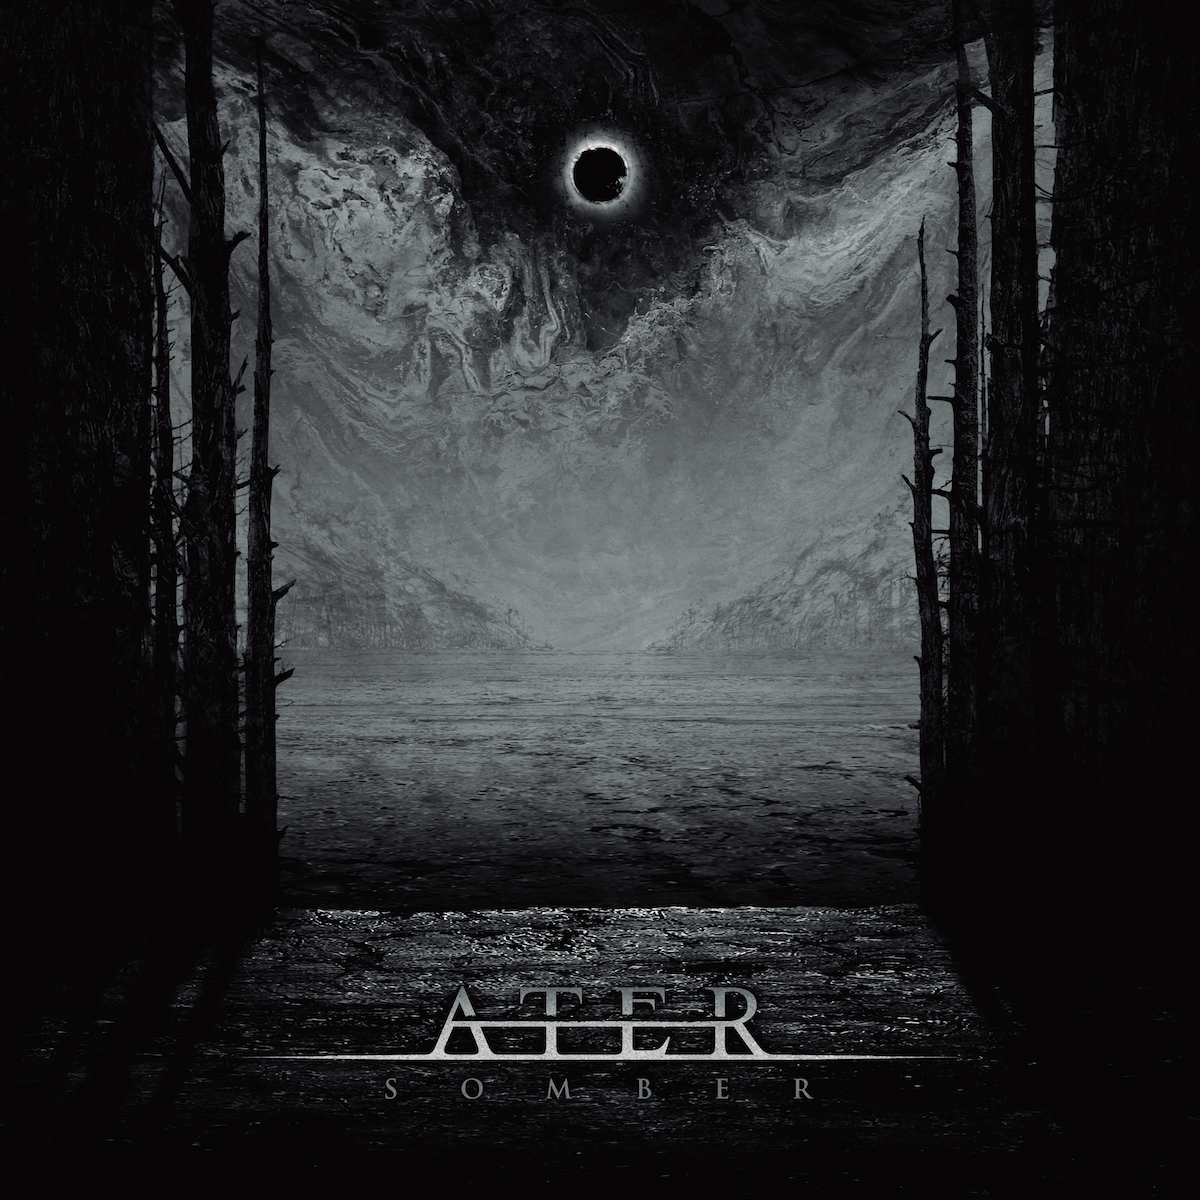 ALBUM REVIEW: Somber by Ater